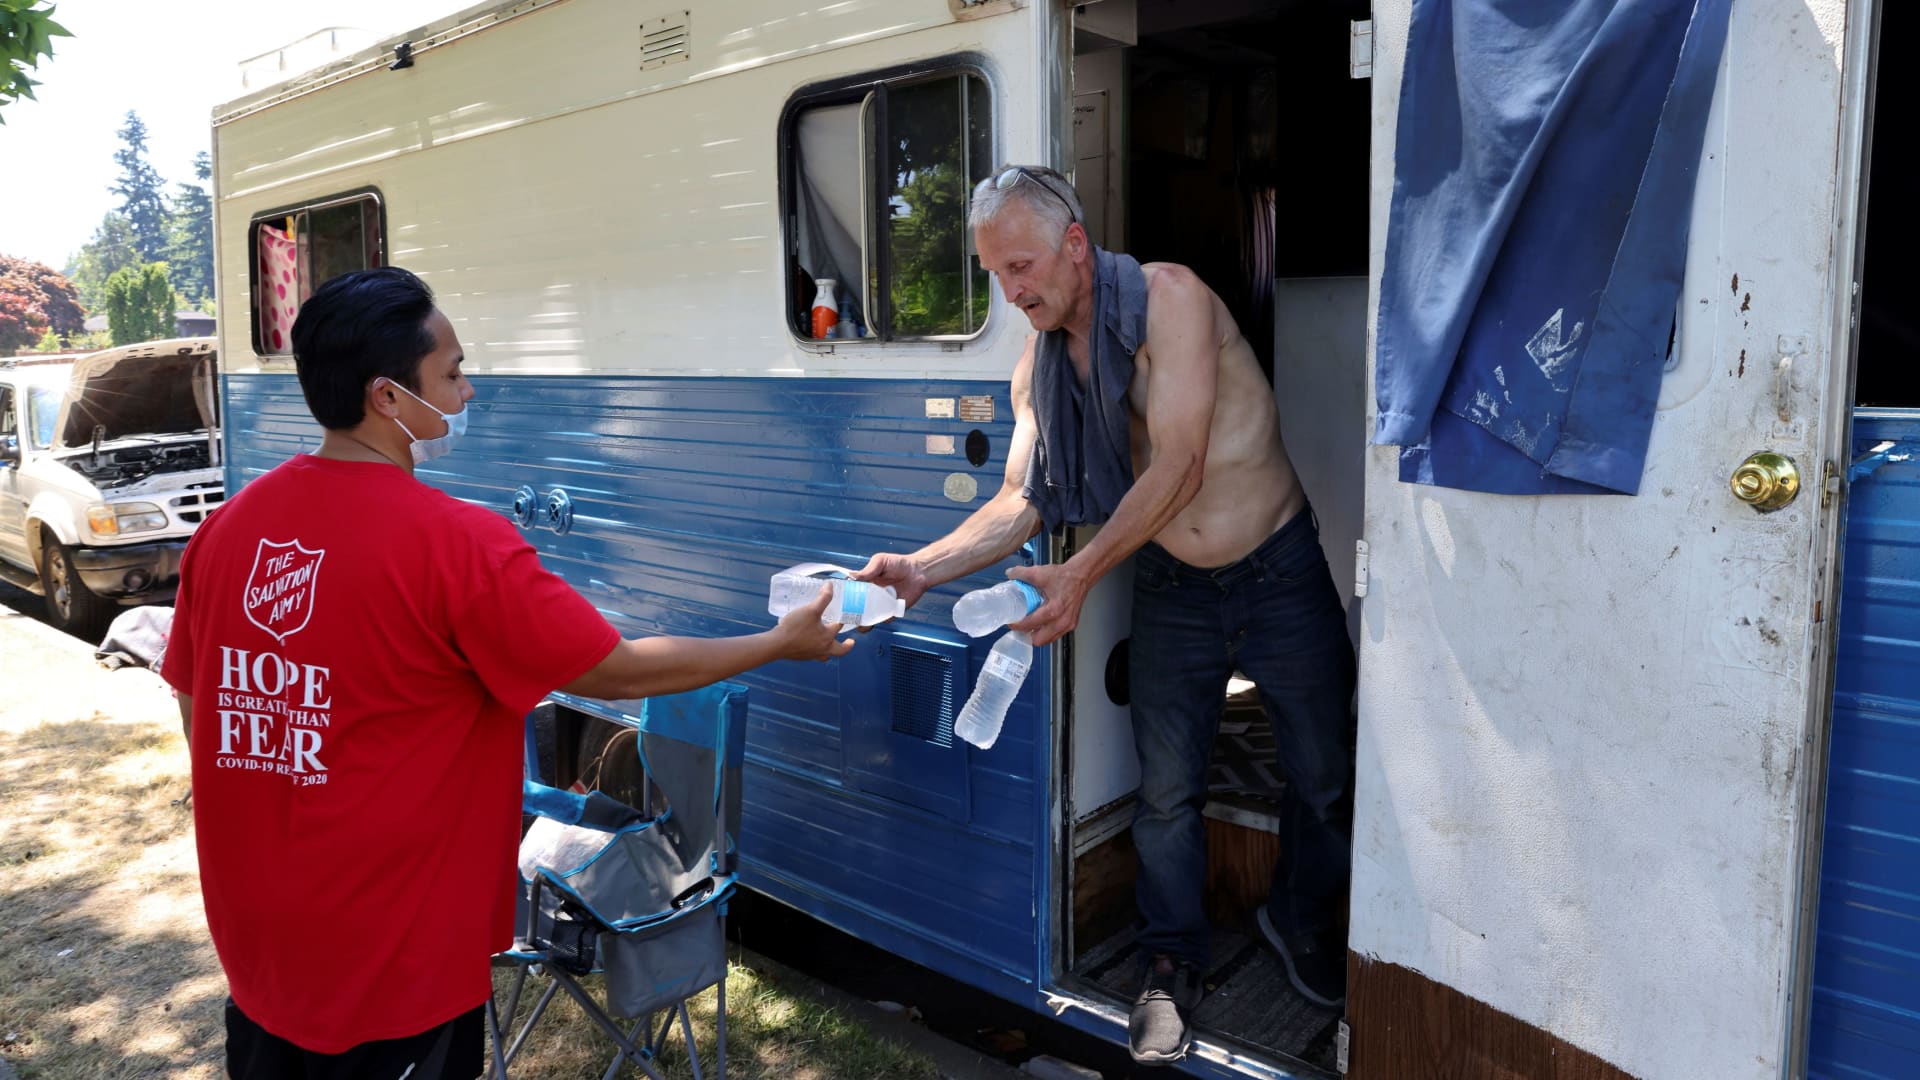 Shanton Alcaraz from the Salvation Army Northwest Division gives bottled water to Eddy Norby who lives in an RV and invites him to their nearby cooling center for food and beverages during a heat wave in Seattle, Washington, U.S., June 27, 2021.